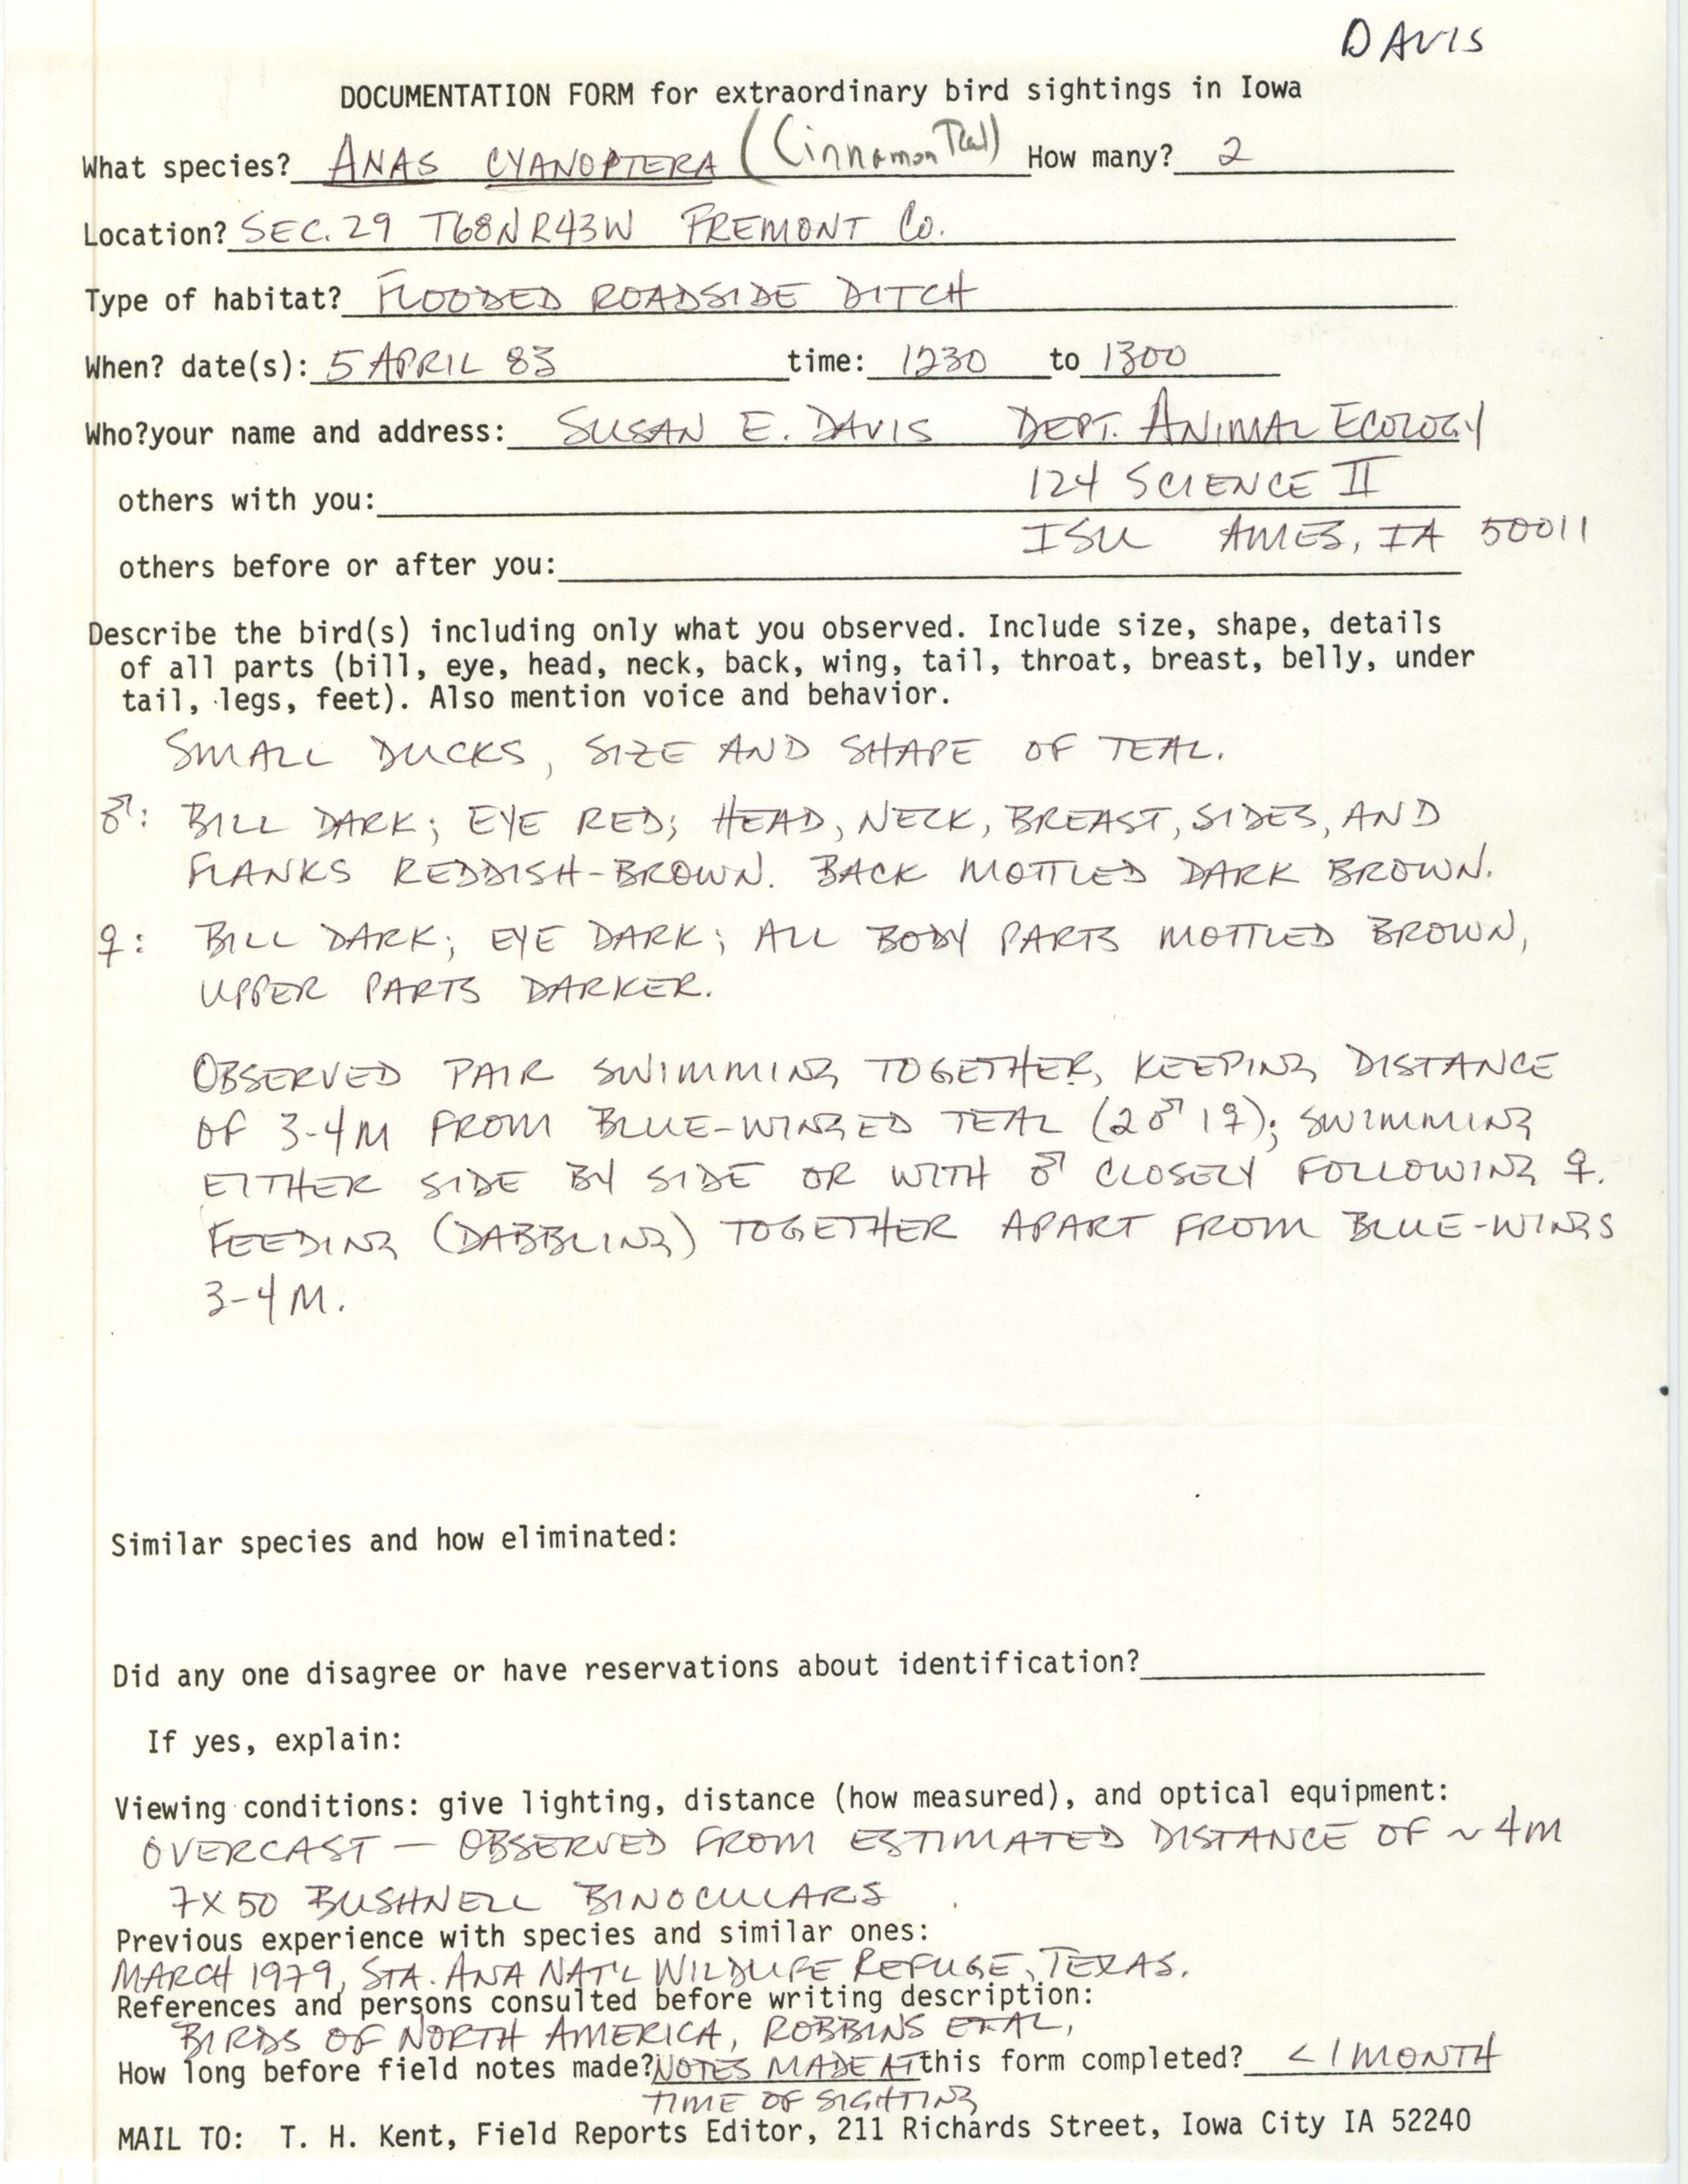 Rare bird documentation form for Cinnamon Teal at Fremont County, 1983